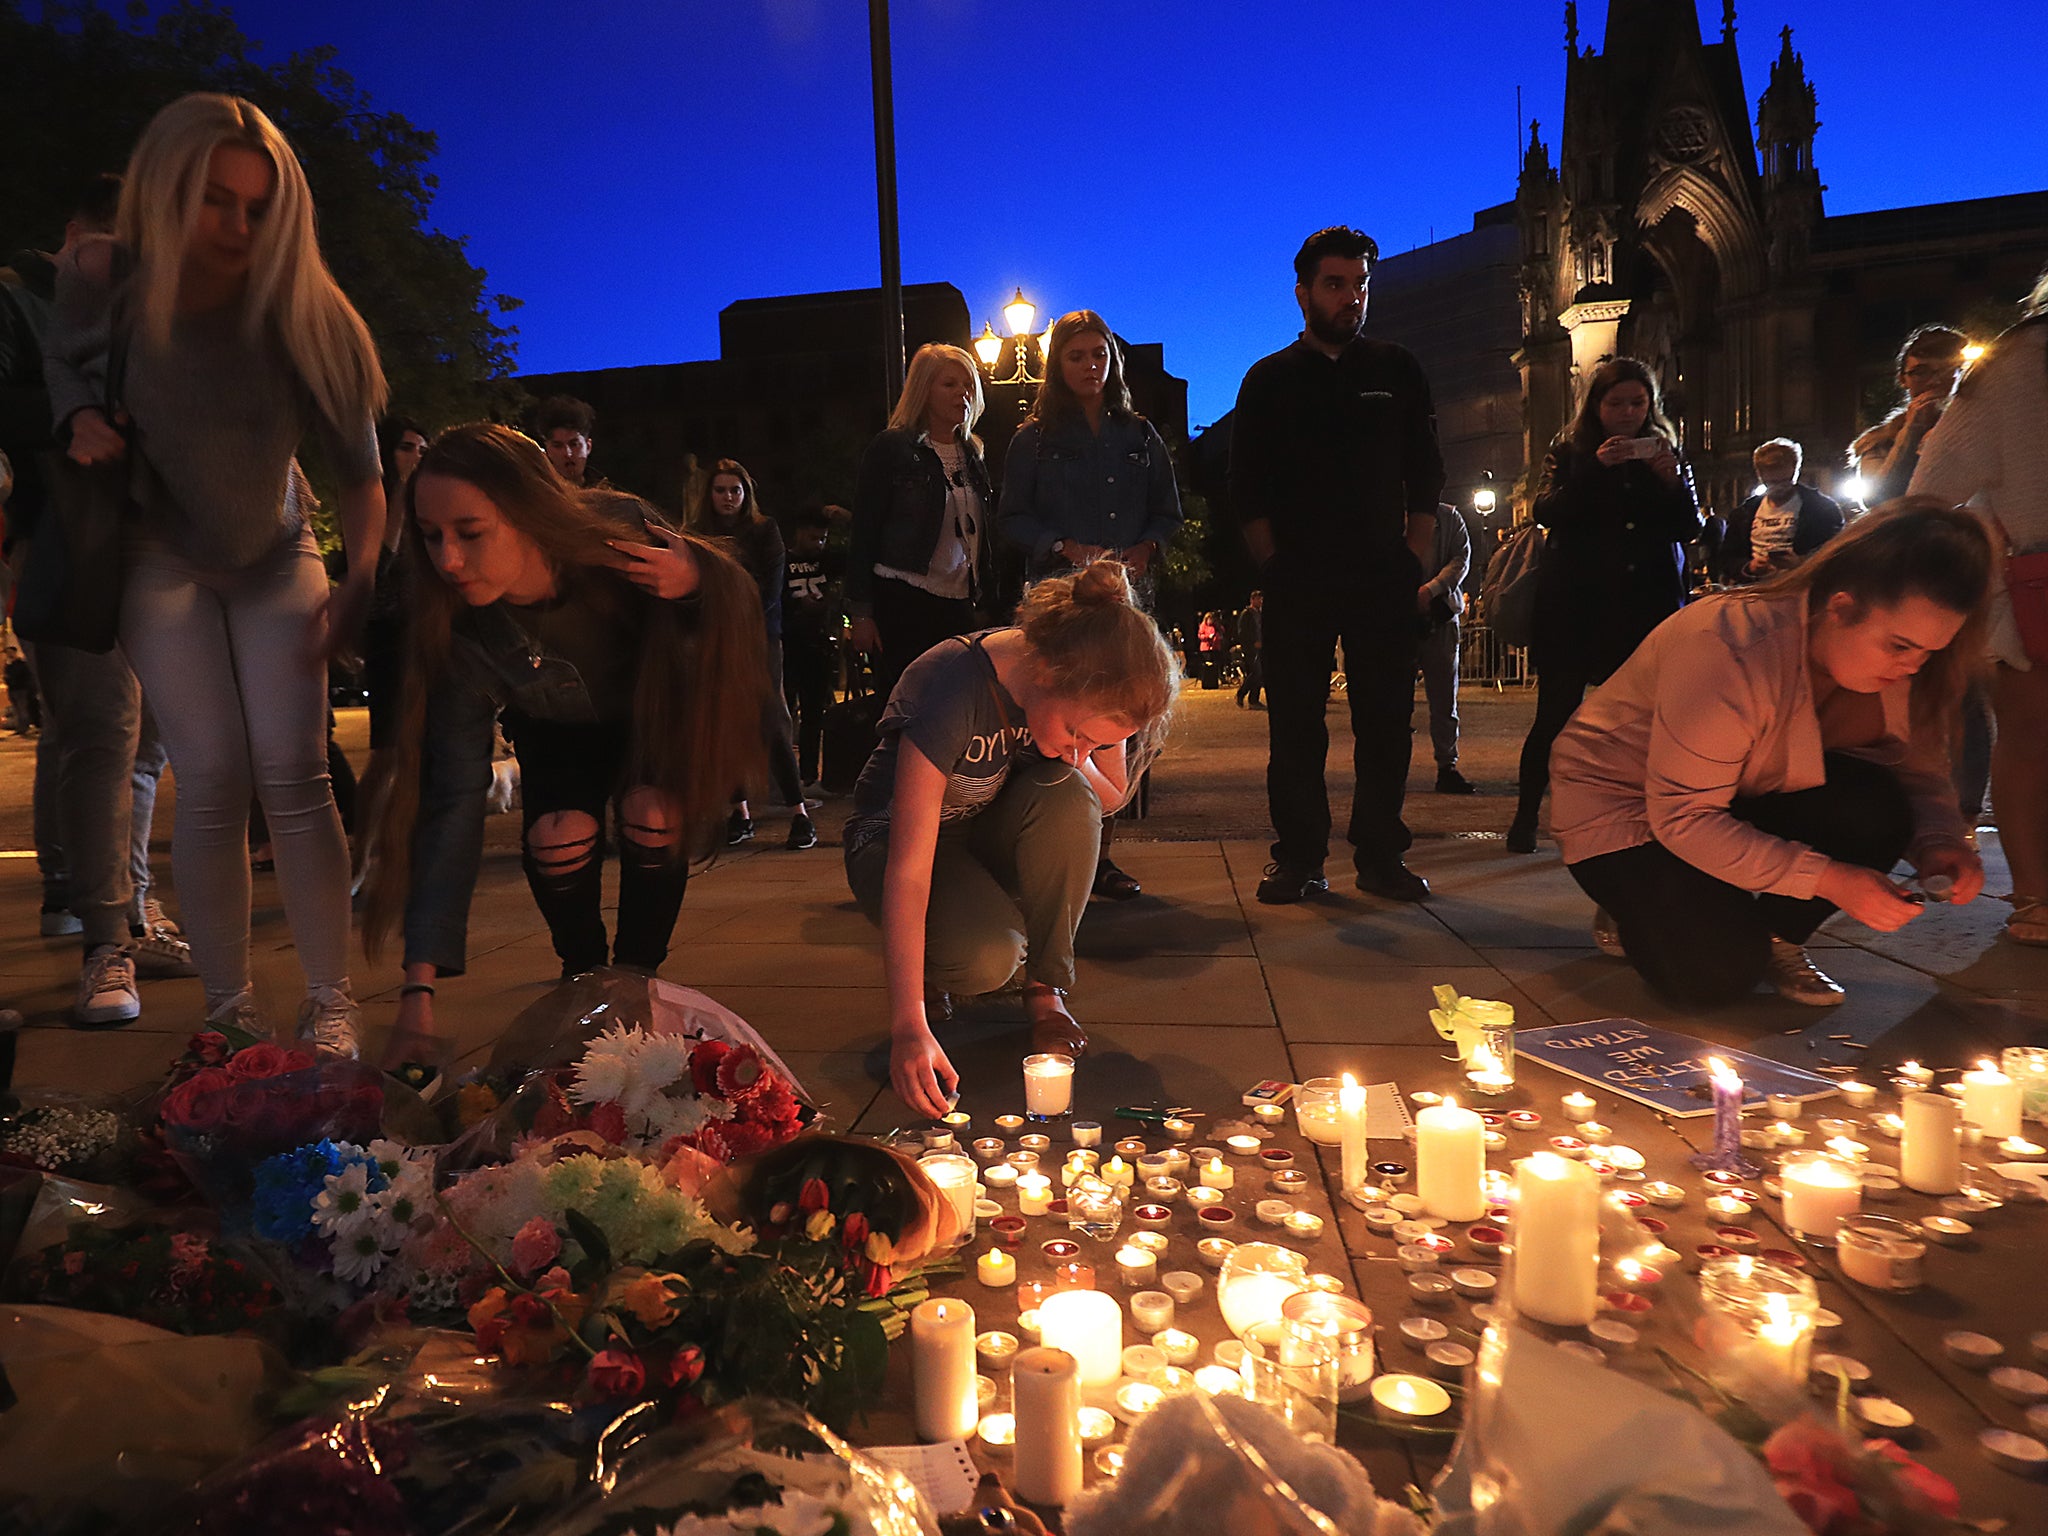 The Manchester attack was an assault on young women celebrating their freedom and ...